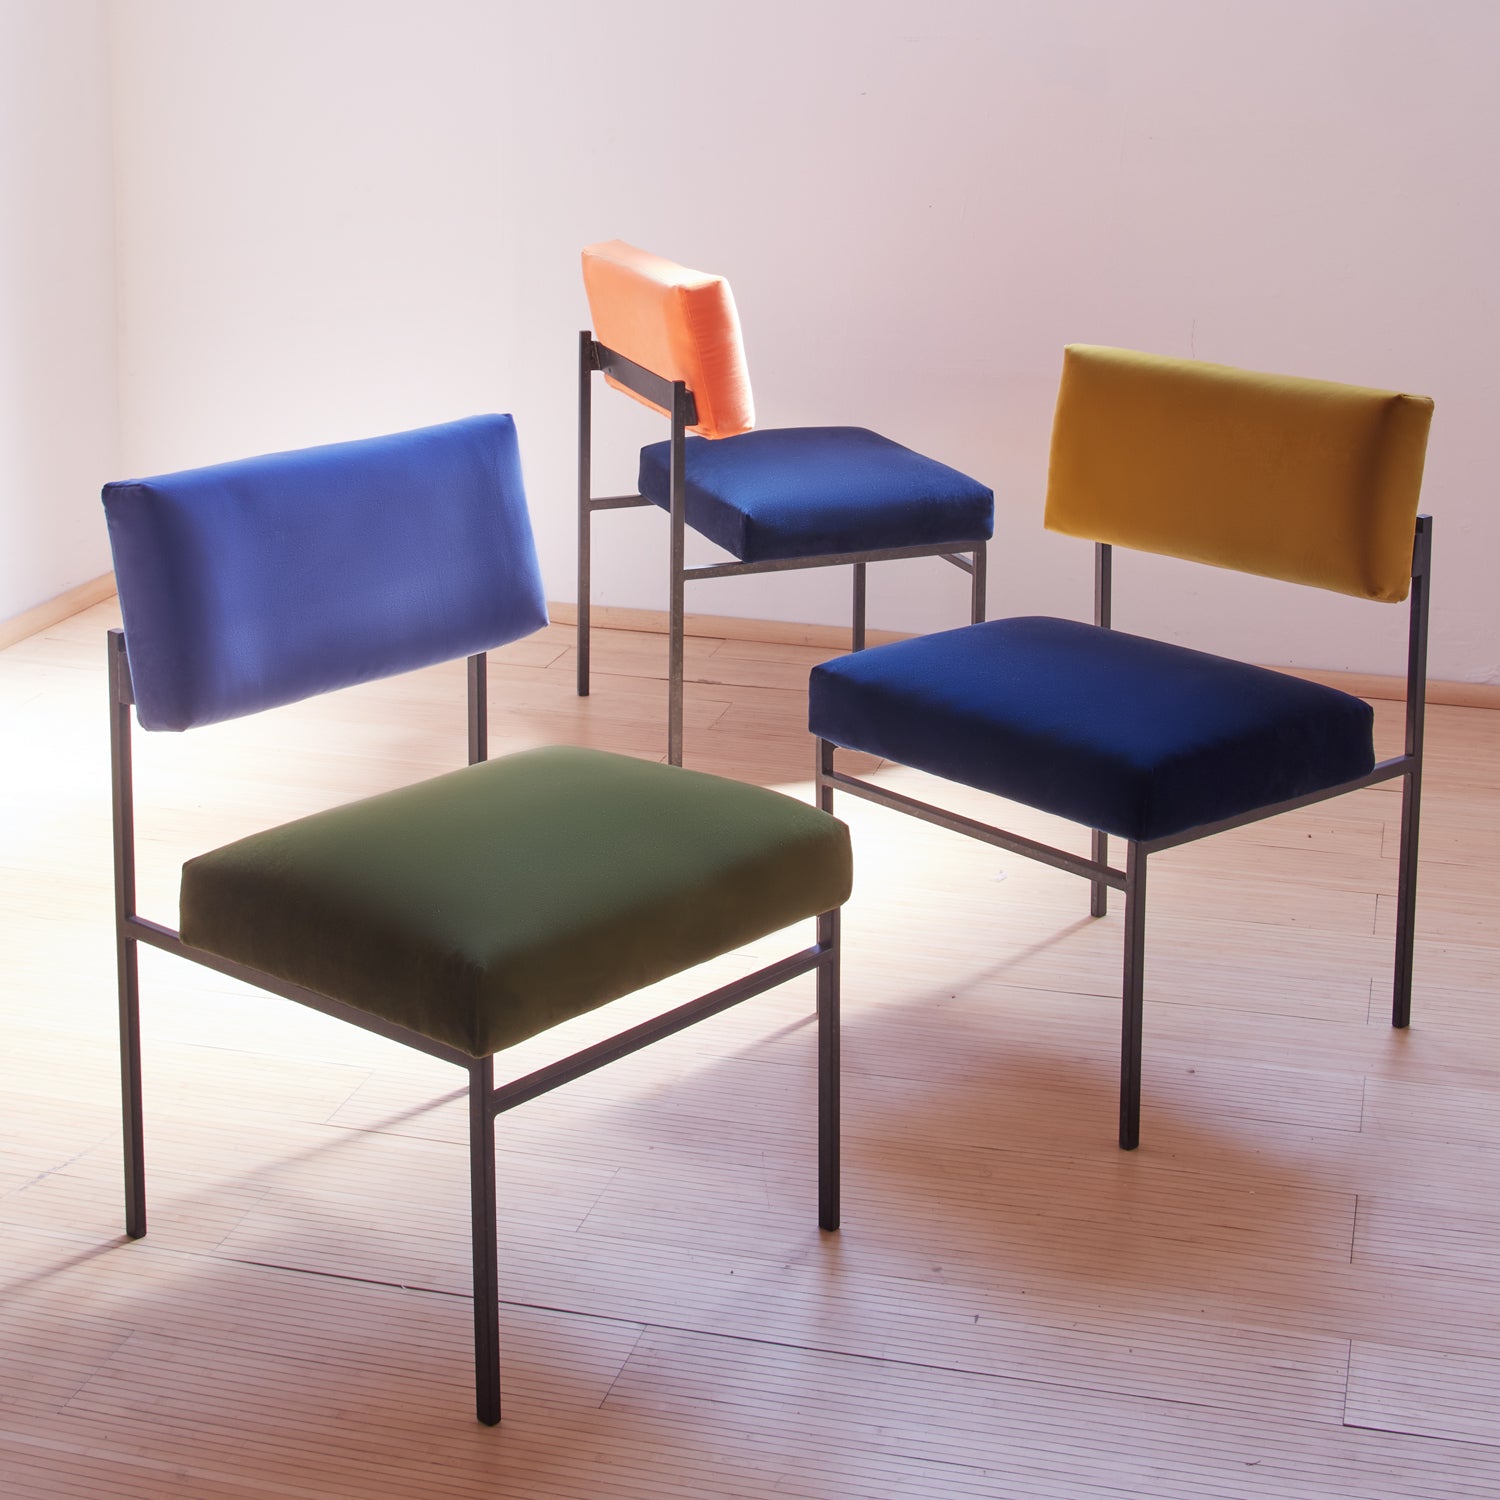 organic dining chairs in variations of green, blue and orange velvet